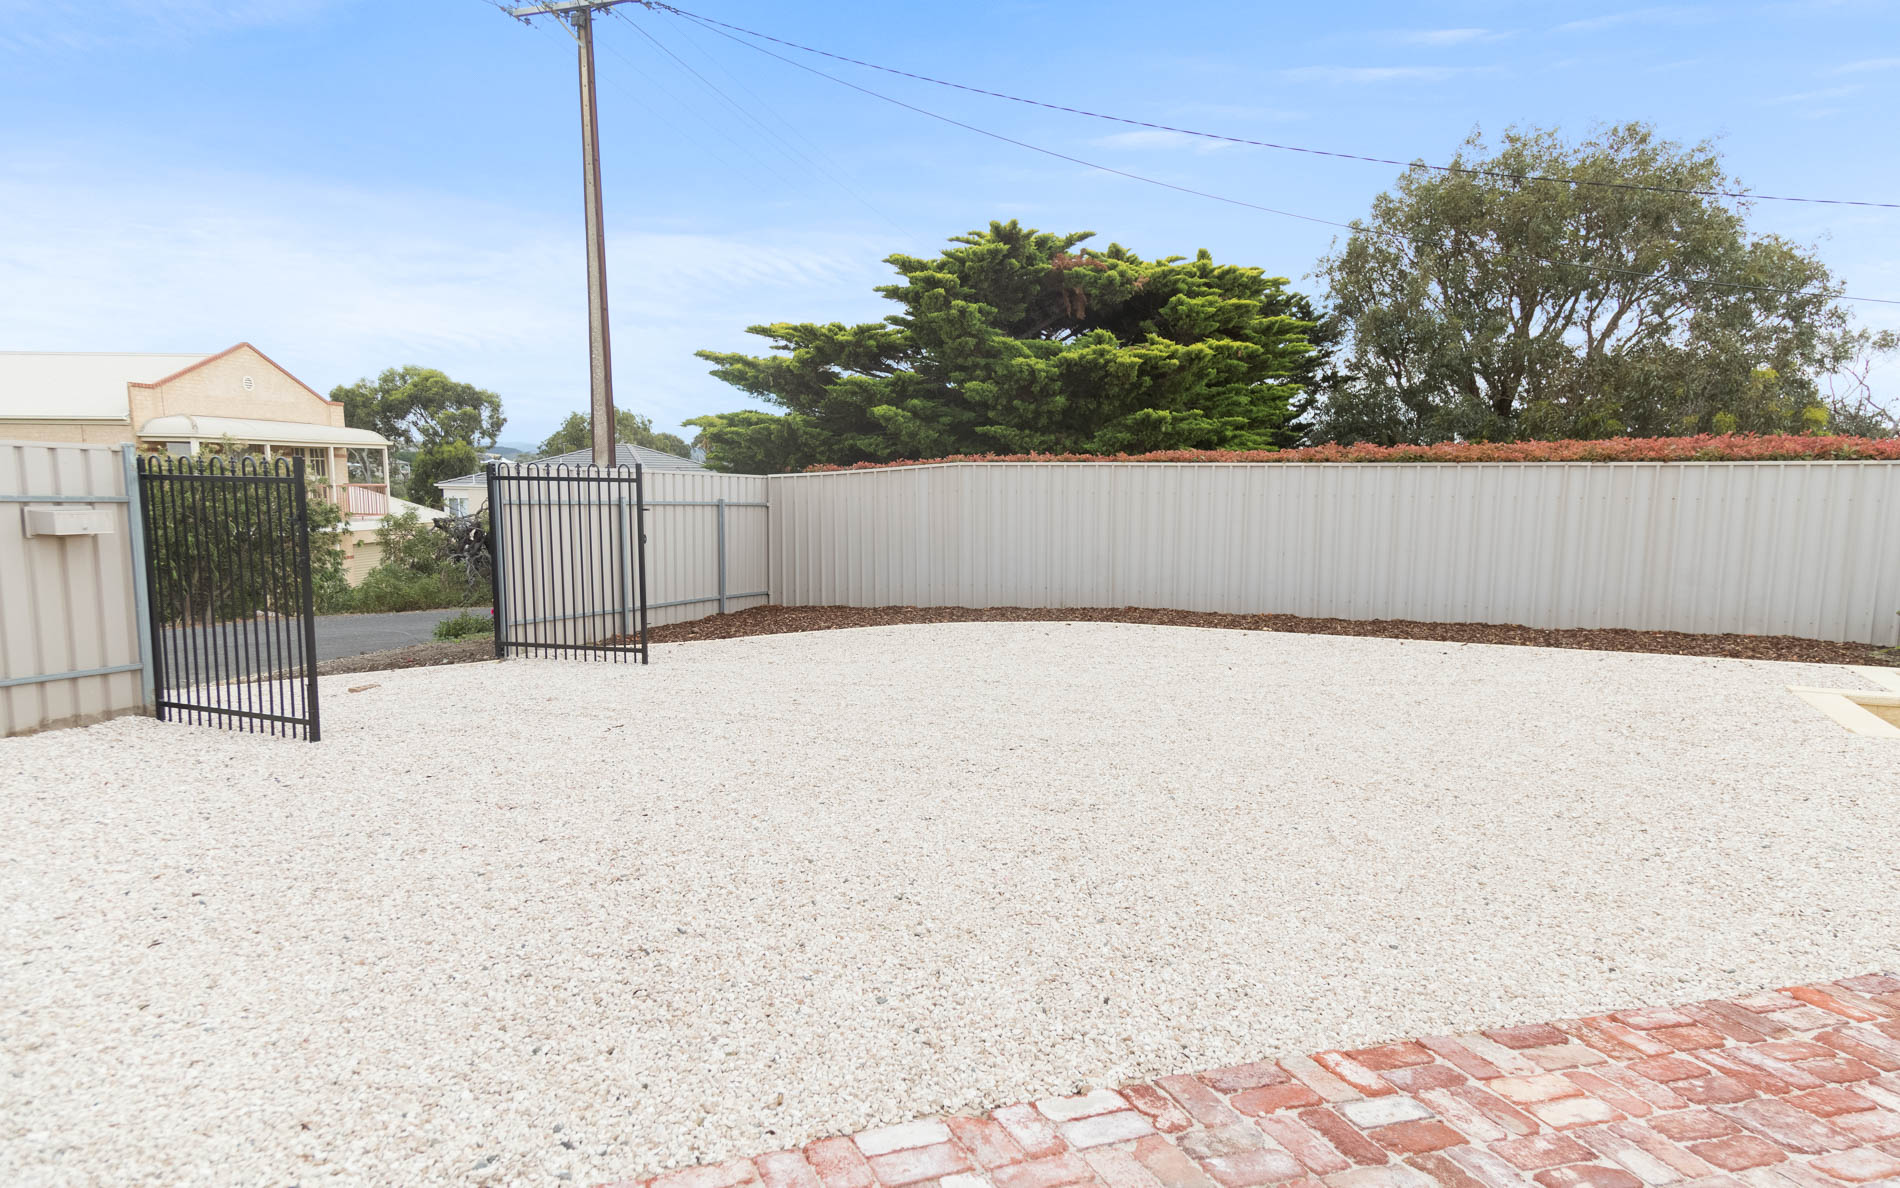 Post and Rail Fence, Friendly Neighbour Fence, Fencing, Fencing Contractors, Landscapers, Paving Contractors, Pavers, Gates, Encounter Bay, Fleurieu